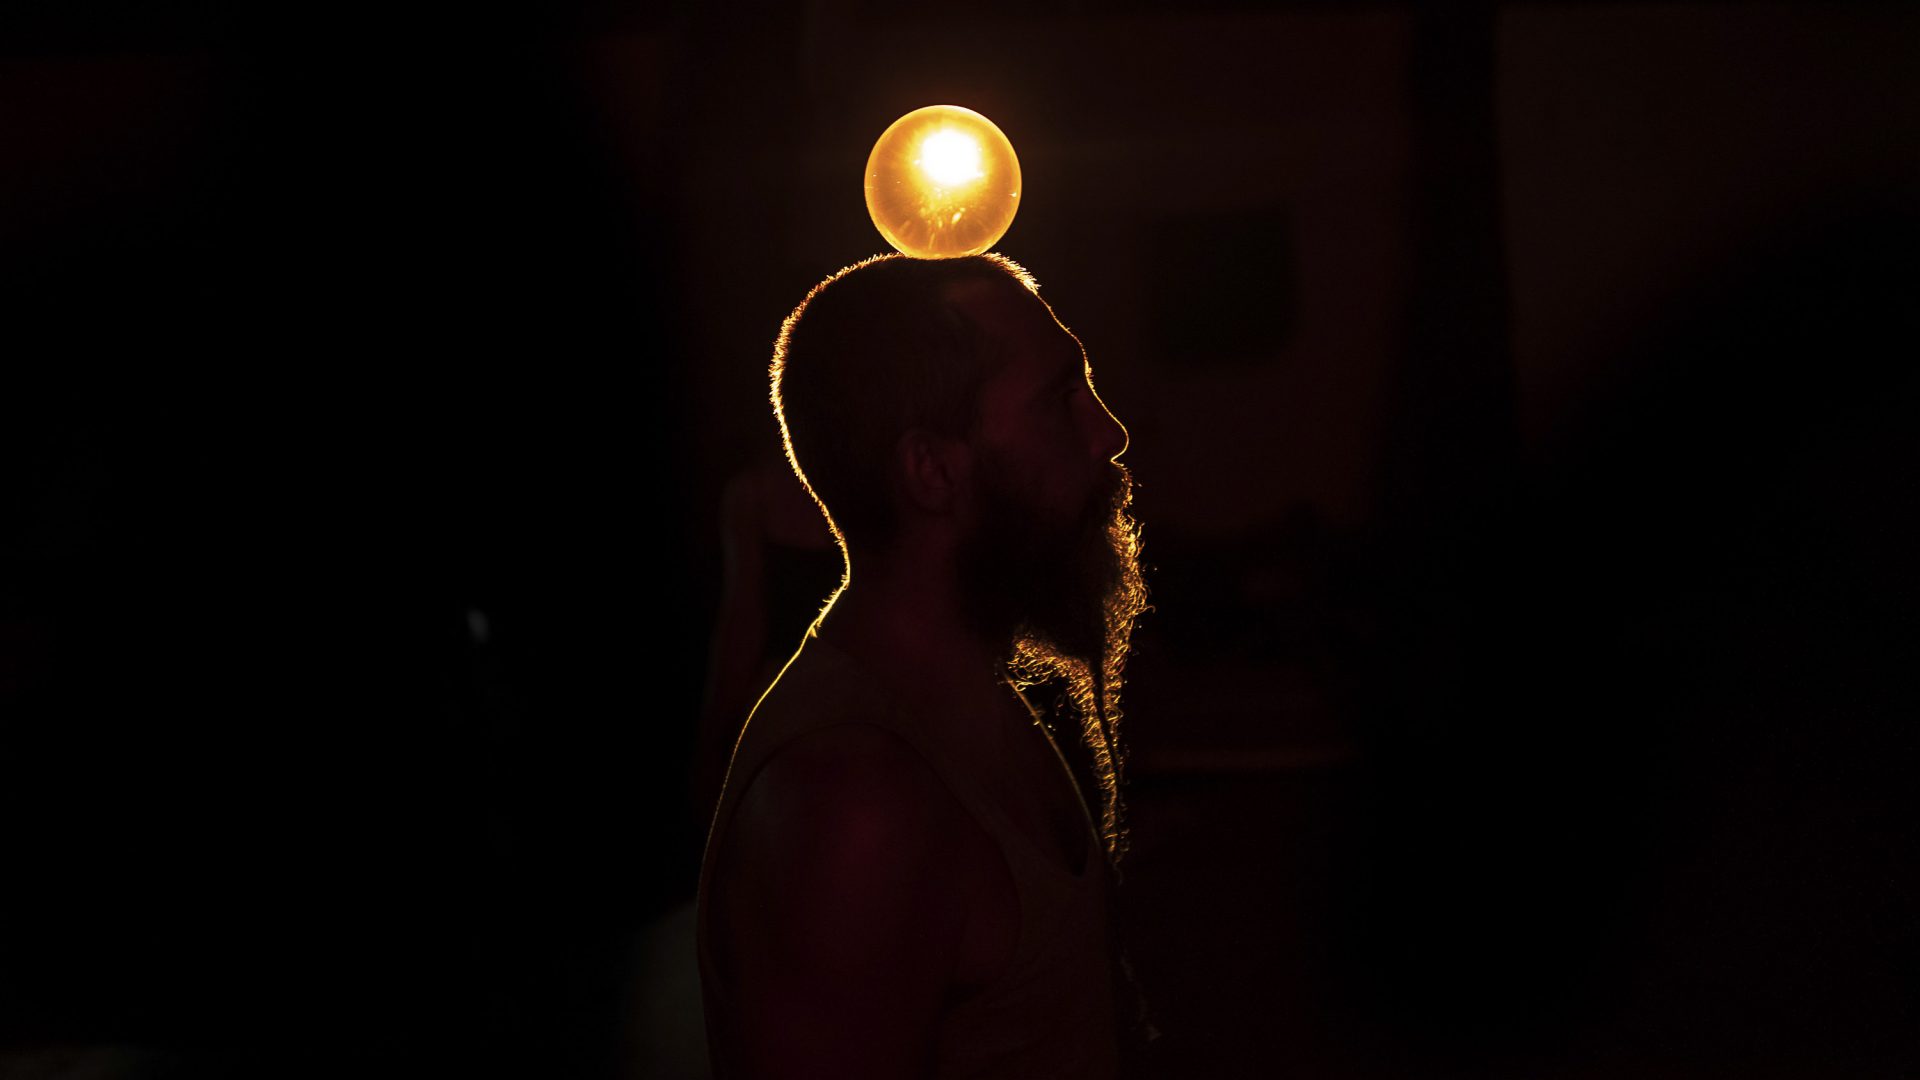 Stefano, silhouetted against the light, balances a glowing ball on his head.